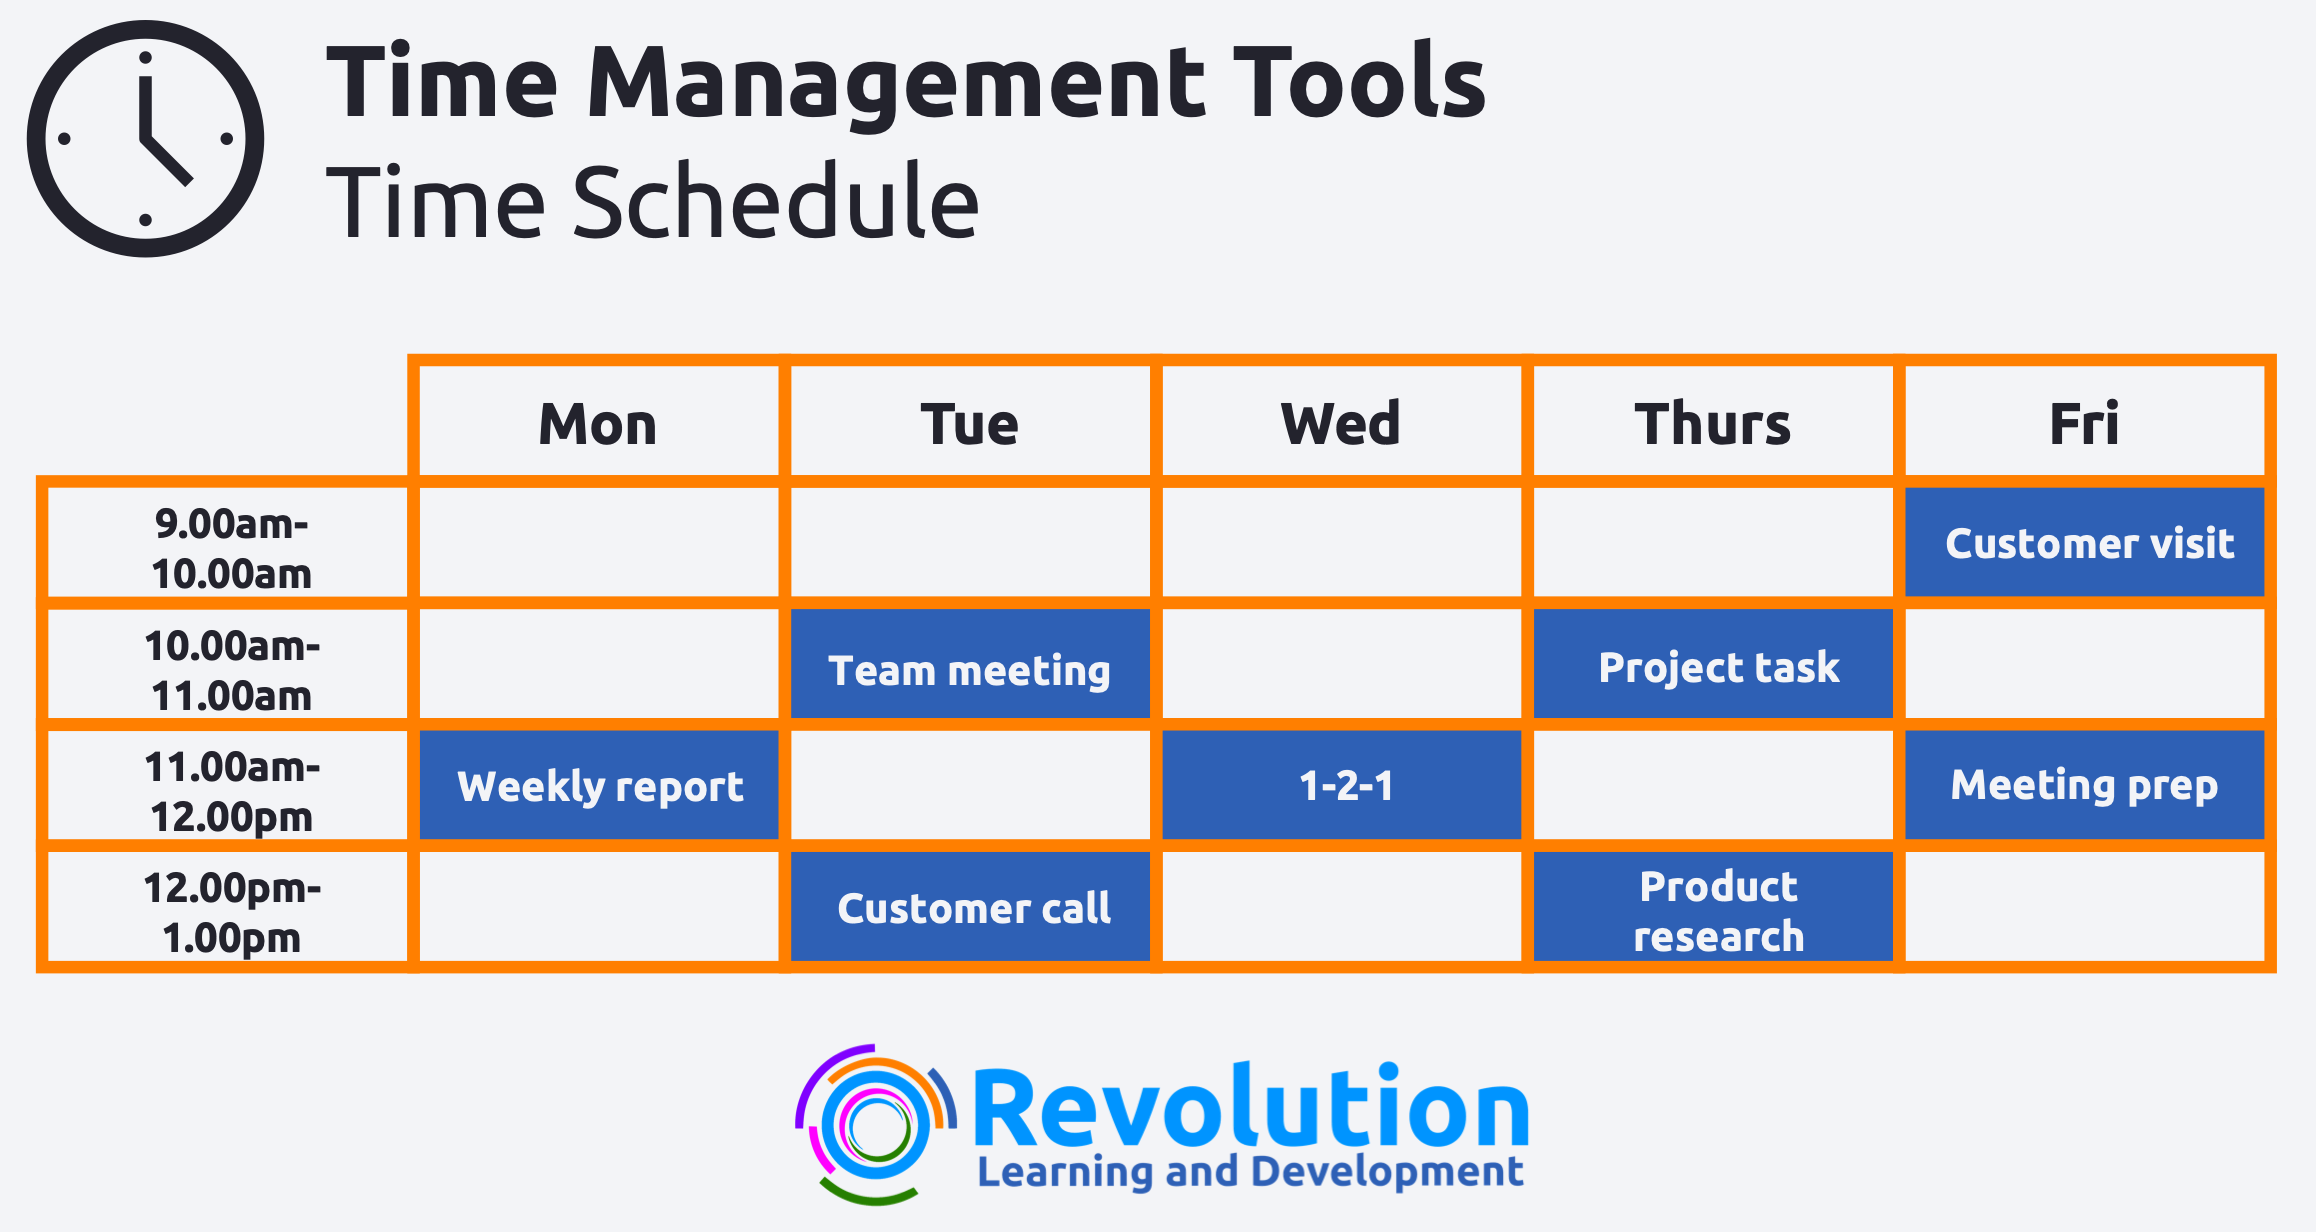 time management tools - time schedule